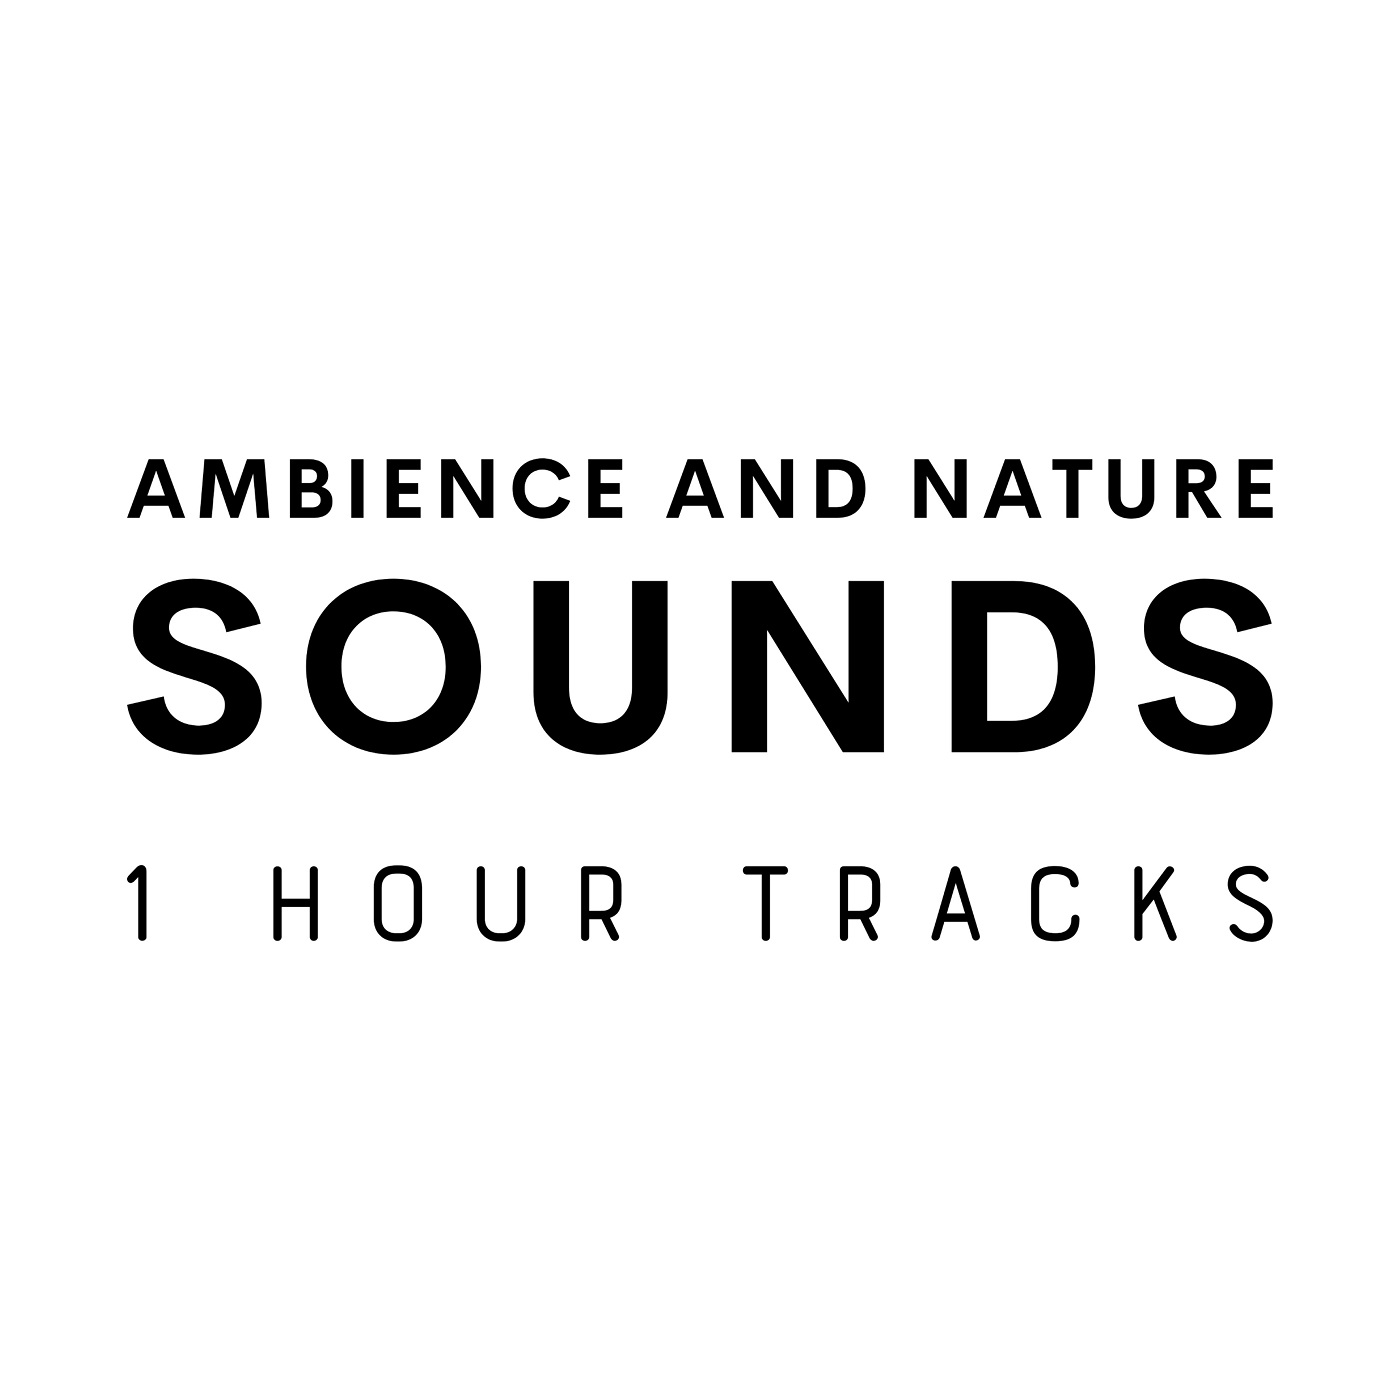 Ambience and Nature Sounds - 1 hour tracks Podcast artwork